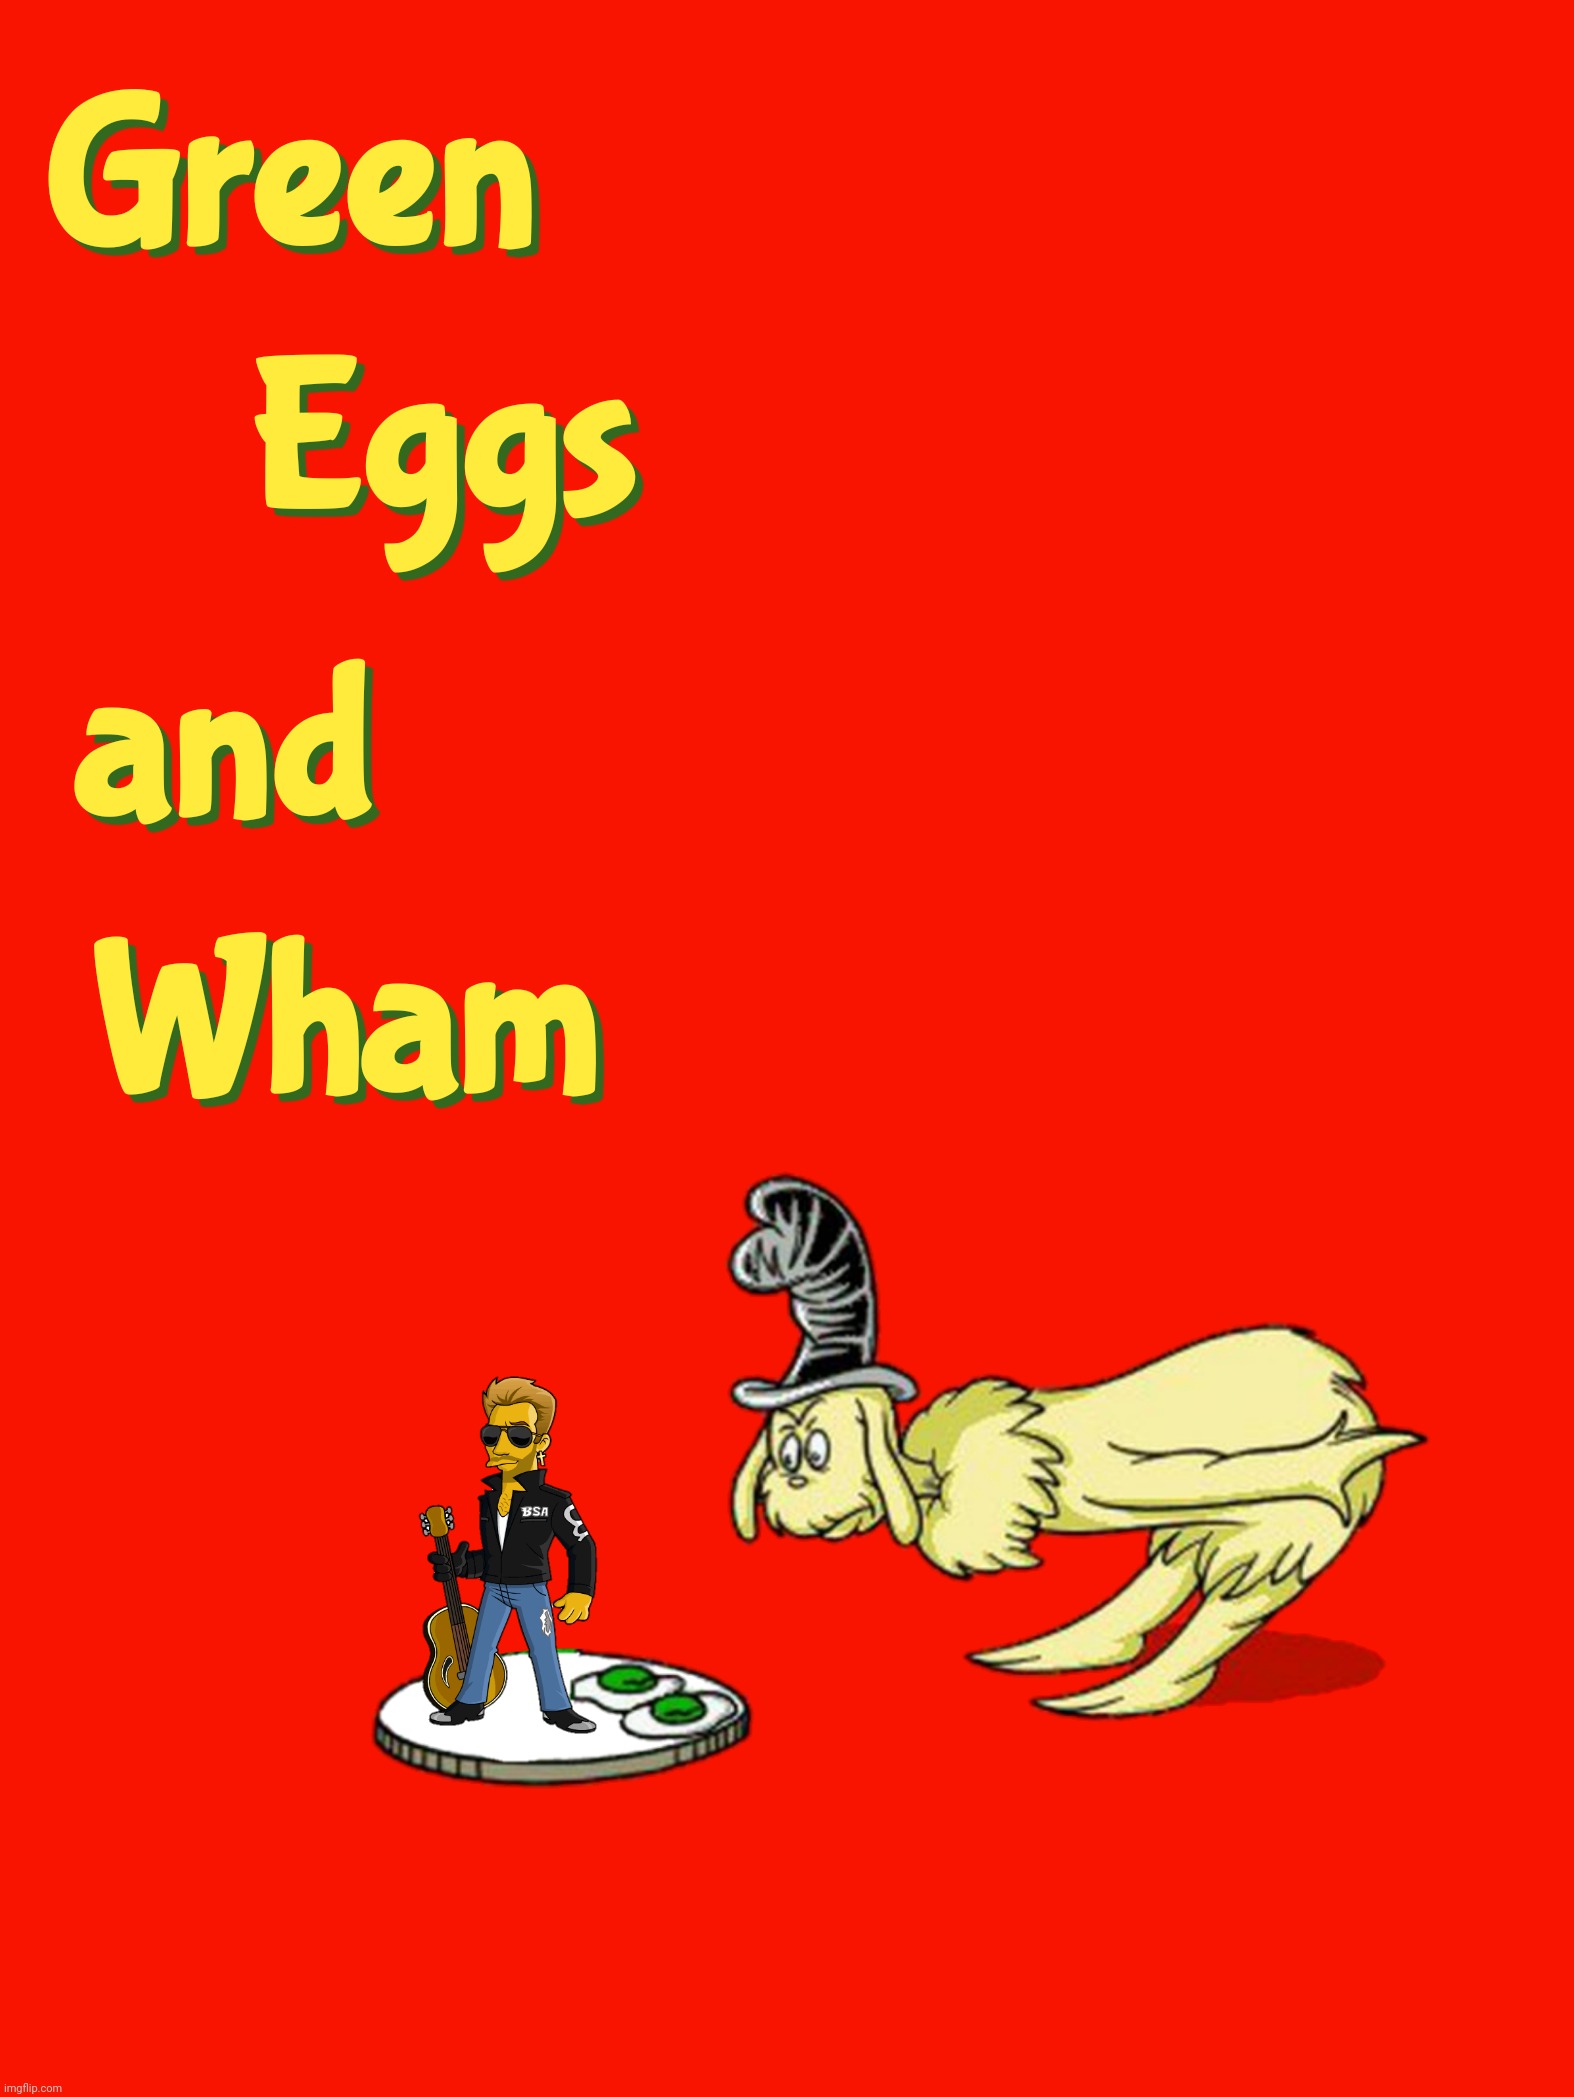 Happy birthday Dr. Suess | image tagged in bad photoshop,dr seuss,green eggs and ham,george michael,wham | made w/ Imgflip meme maker